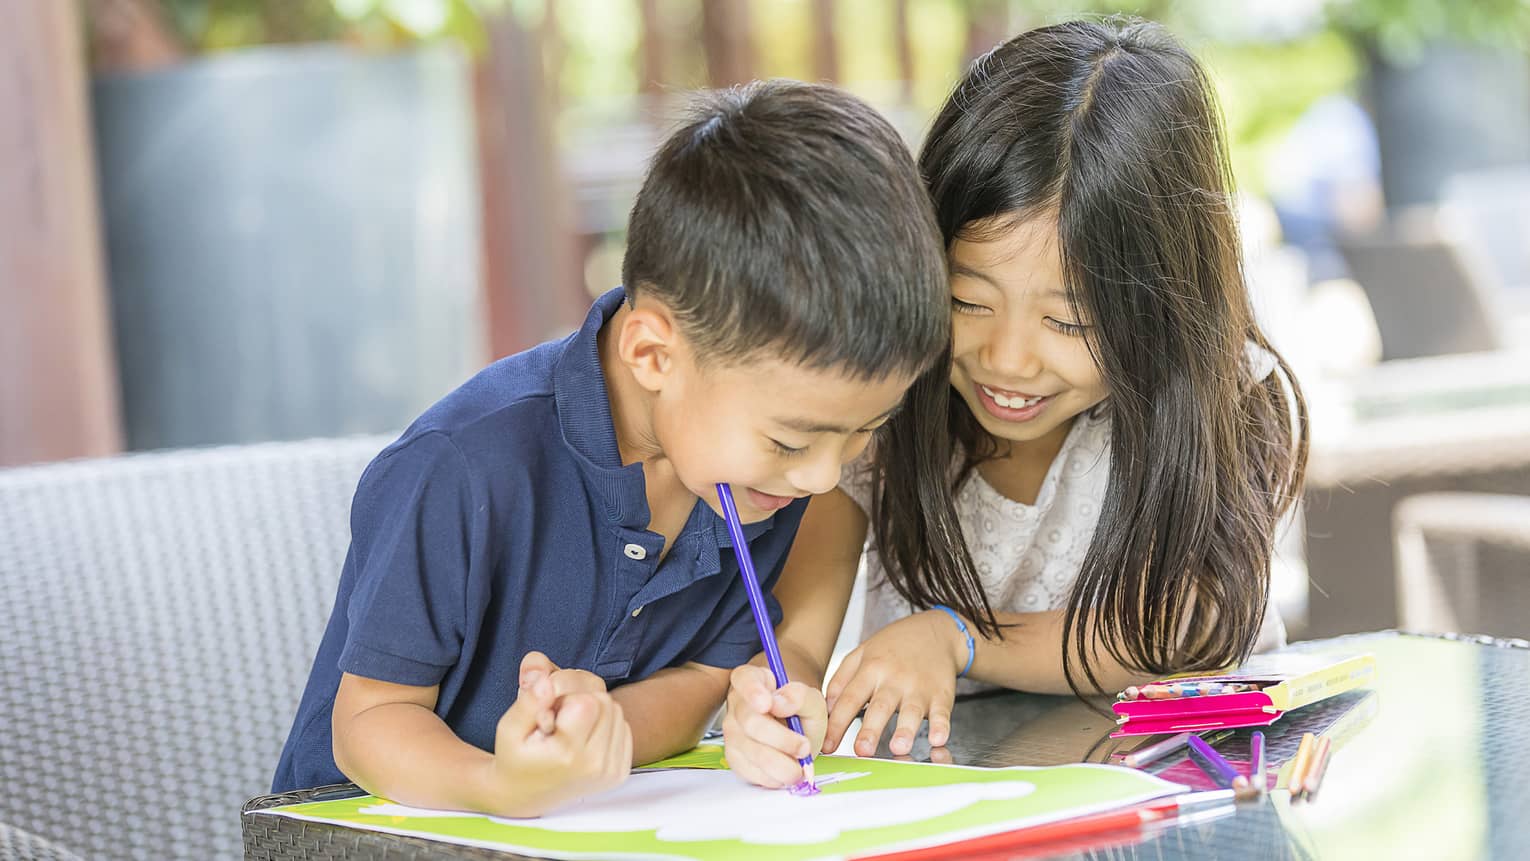 Smiling young boy and girl colouring in book with crayon